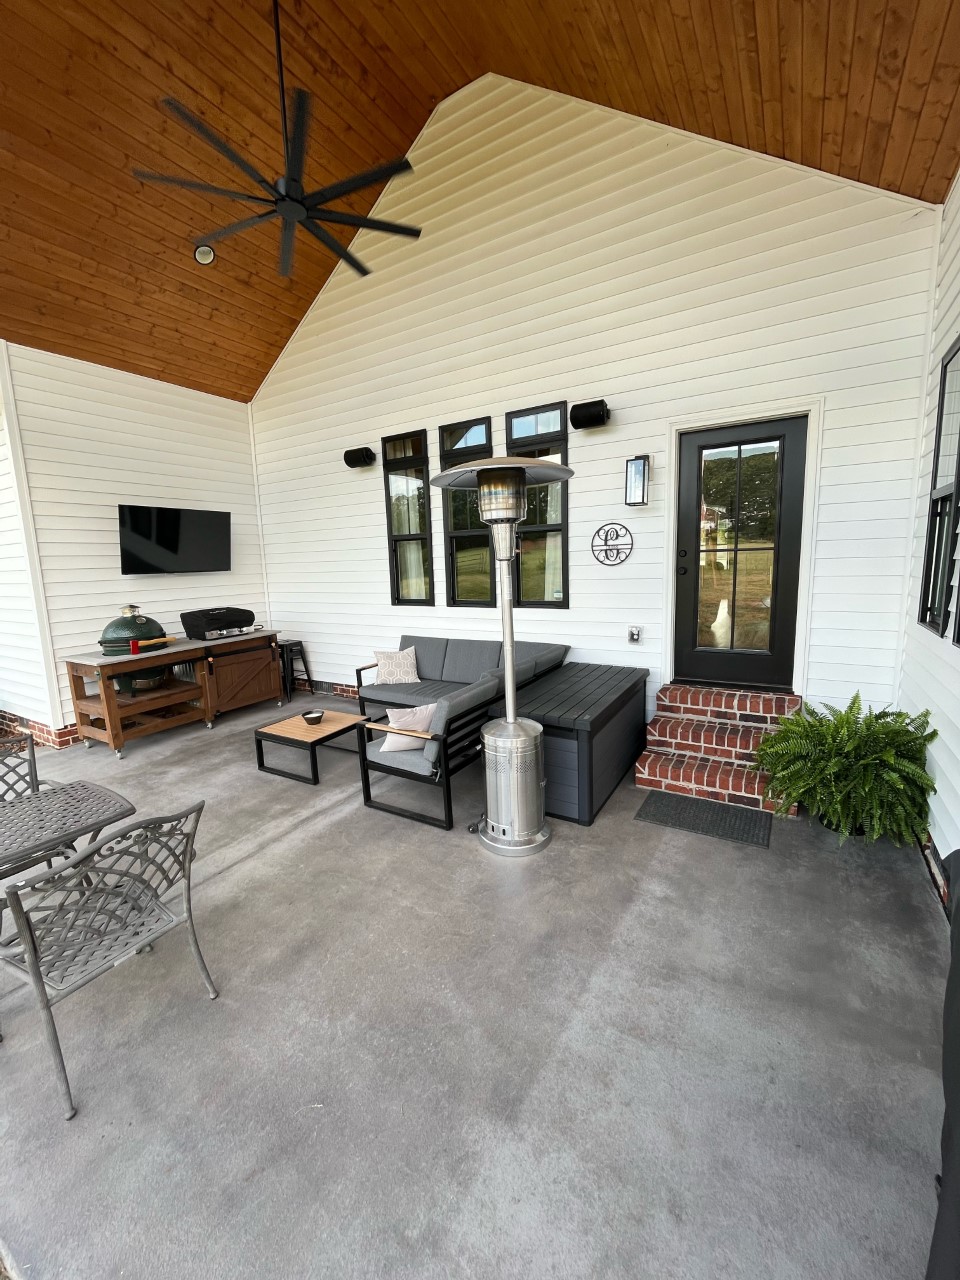 Image showcasing the revitalized concrete covered patio with Silver Gray Antiquing stain, now adorned with outdoor furniture, highlighting the transformed space ready for enjoyment.